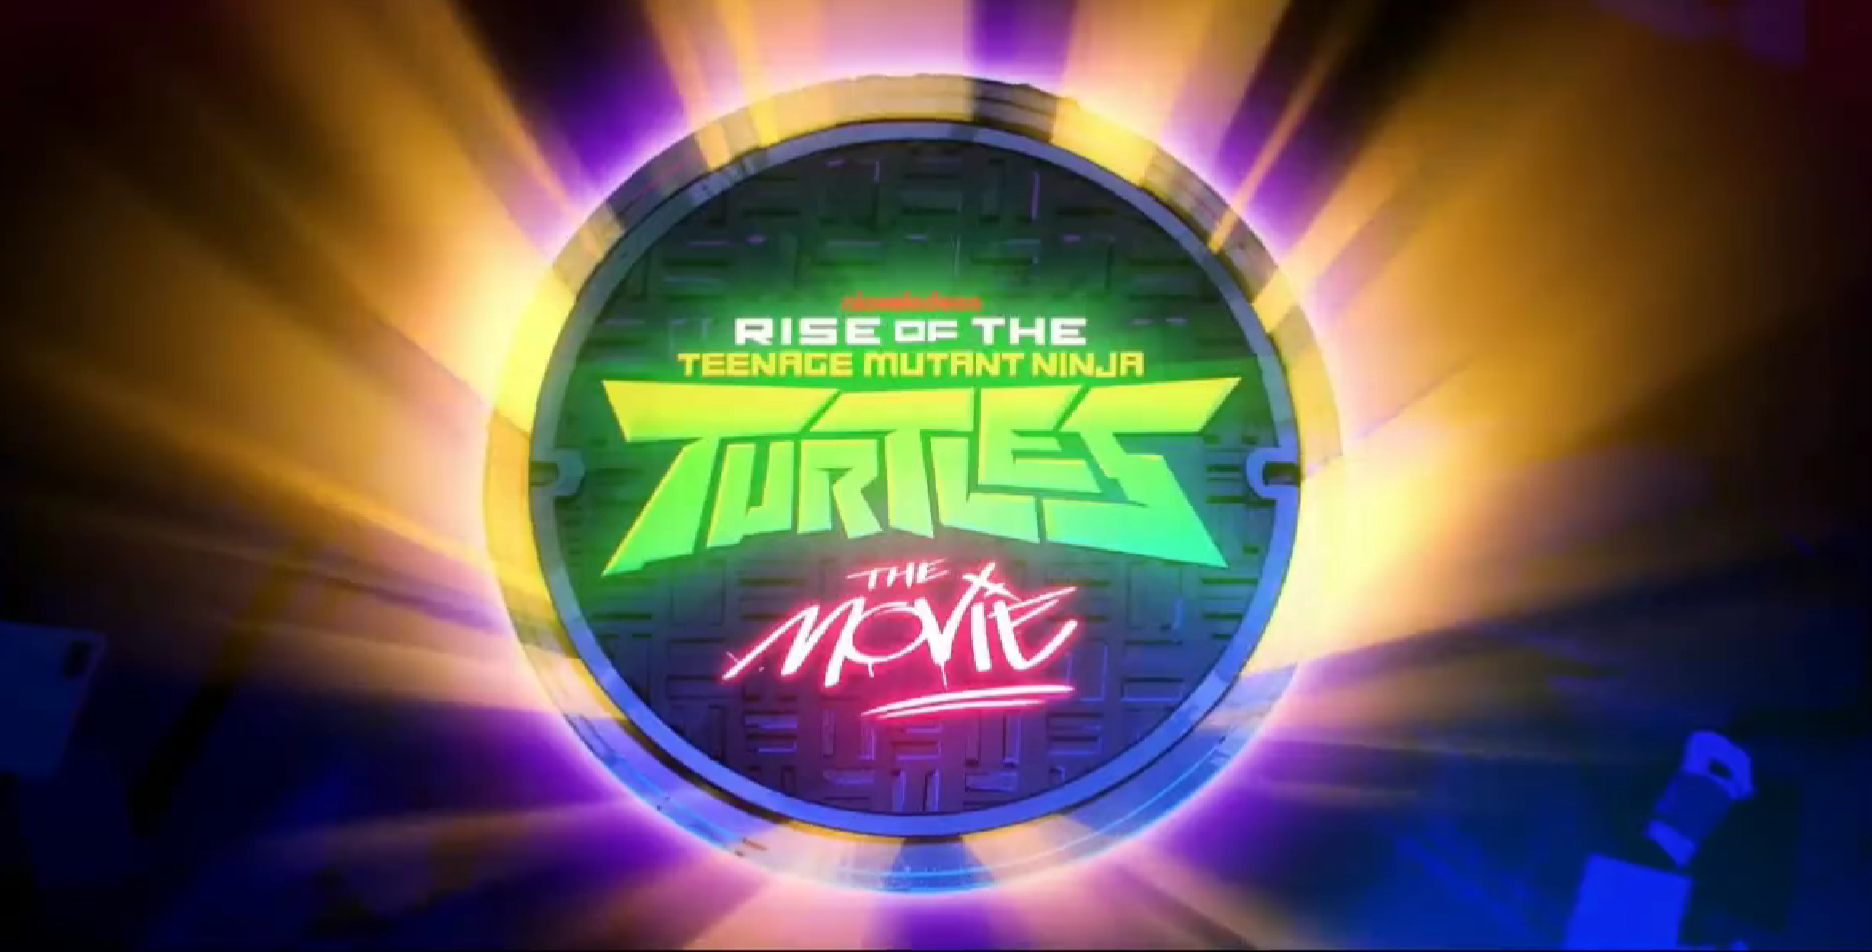 https://static.wikia.nocookie.net/tmnt/images/b/b7/Rise_movie_title.png/revision/latest?cb=20220630172028